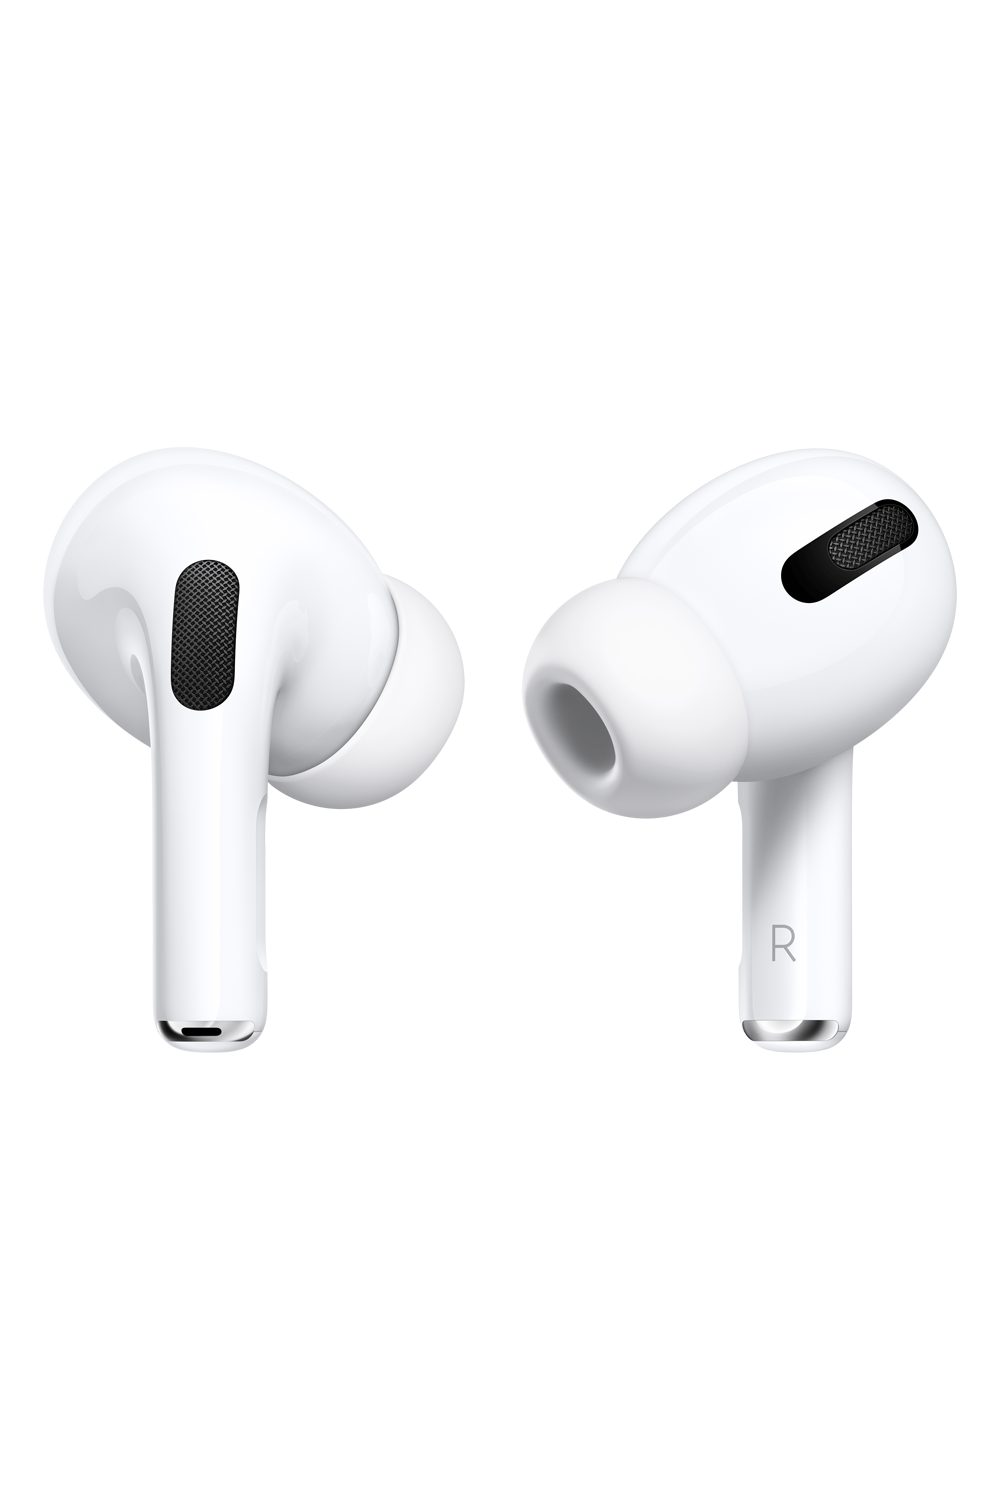 Apple MWP22HN/A Wireless Airpods Pro With Wireless Charging Case, White - QuickTech.in